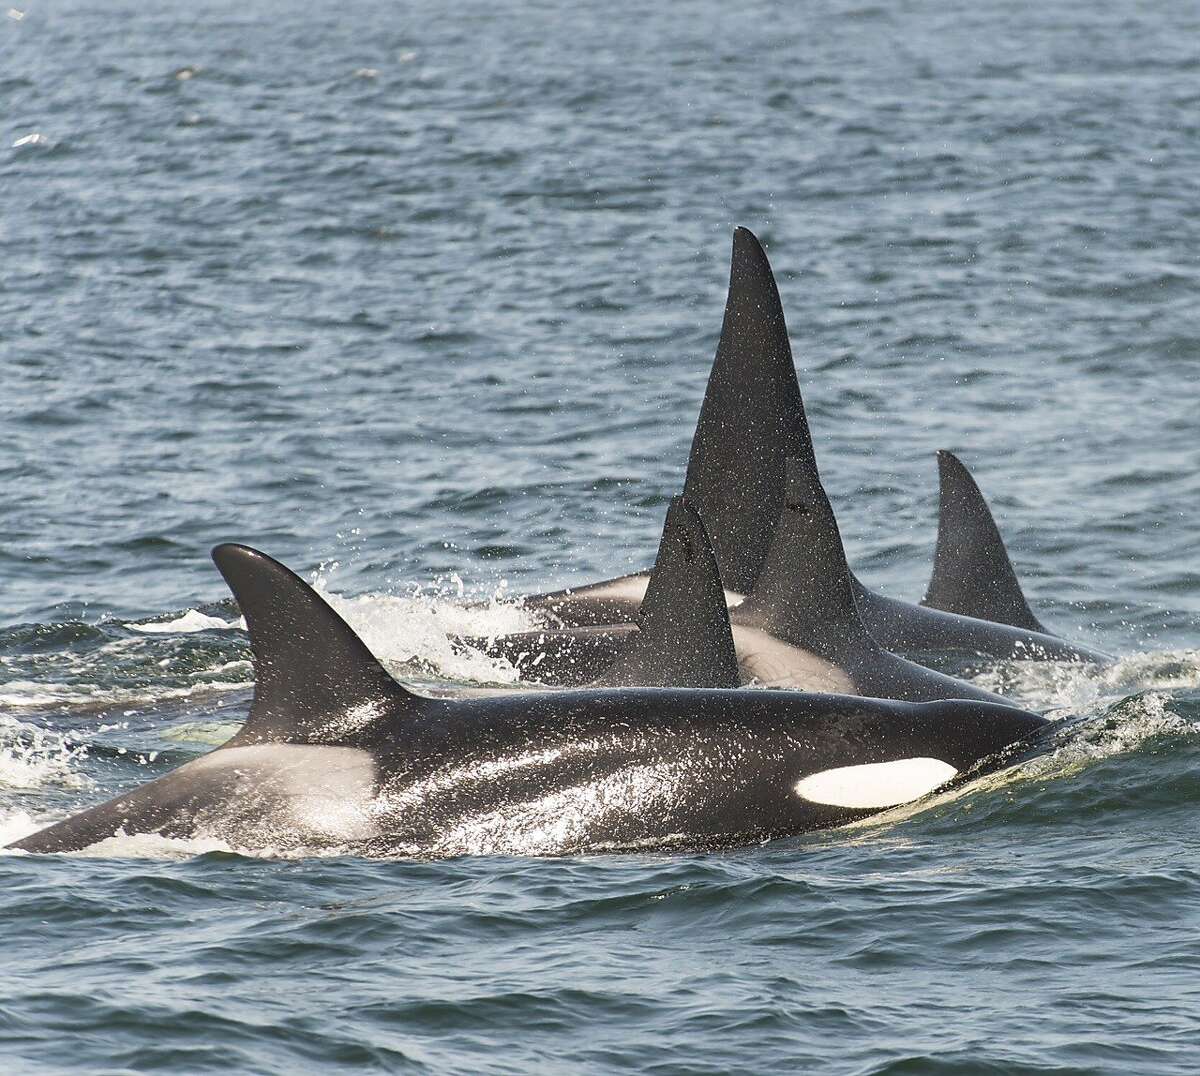 Pod of orcas attacked whales, trying to separate calf from mother, "like a swarm of hockey players" in Monterey Bay